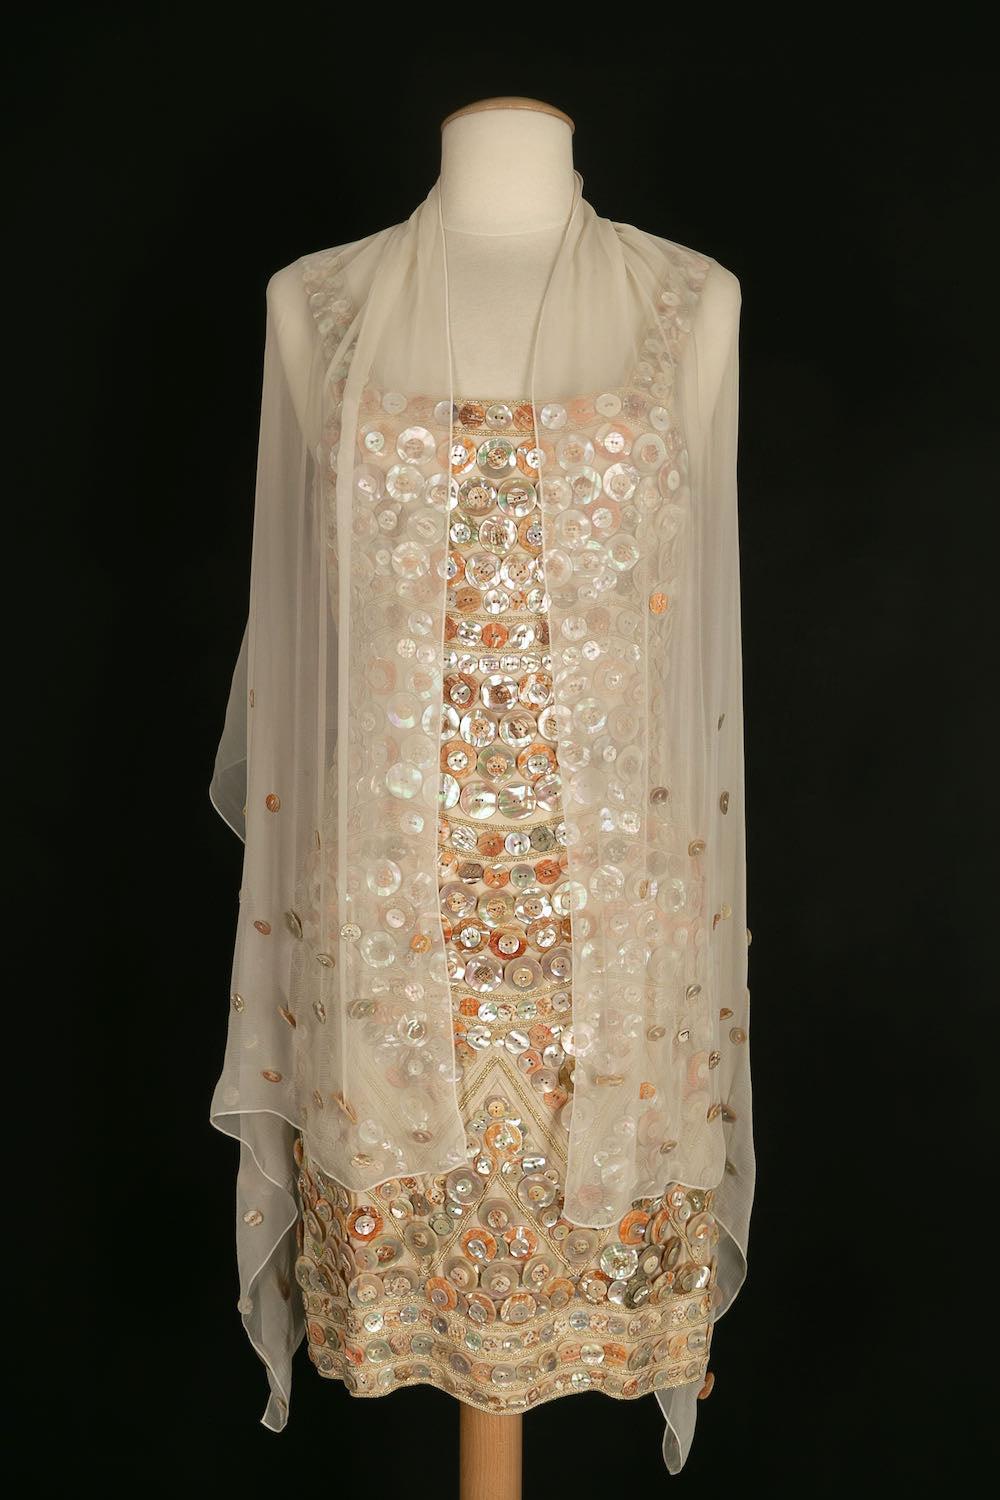 Louis Féraud -Satin dress embroidered with mother of pearl buttons. It is accompanied by a beige muslin stole also embroidered. 
No size indicated, it corresponds to a 34FR/36FR. 
Collection 